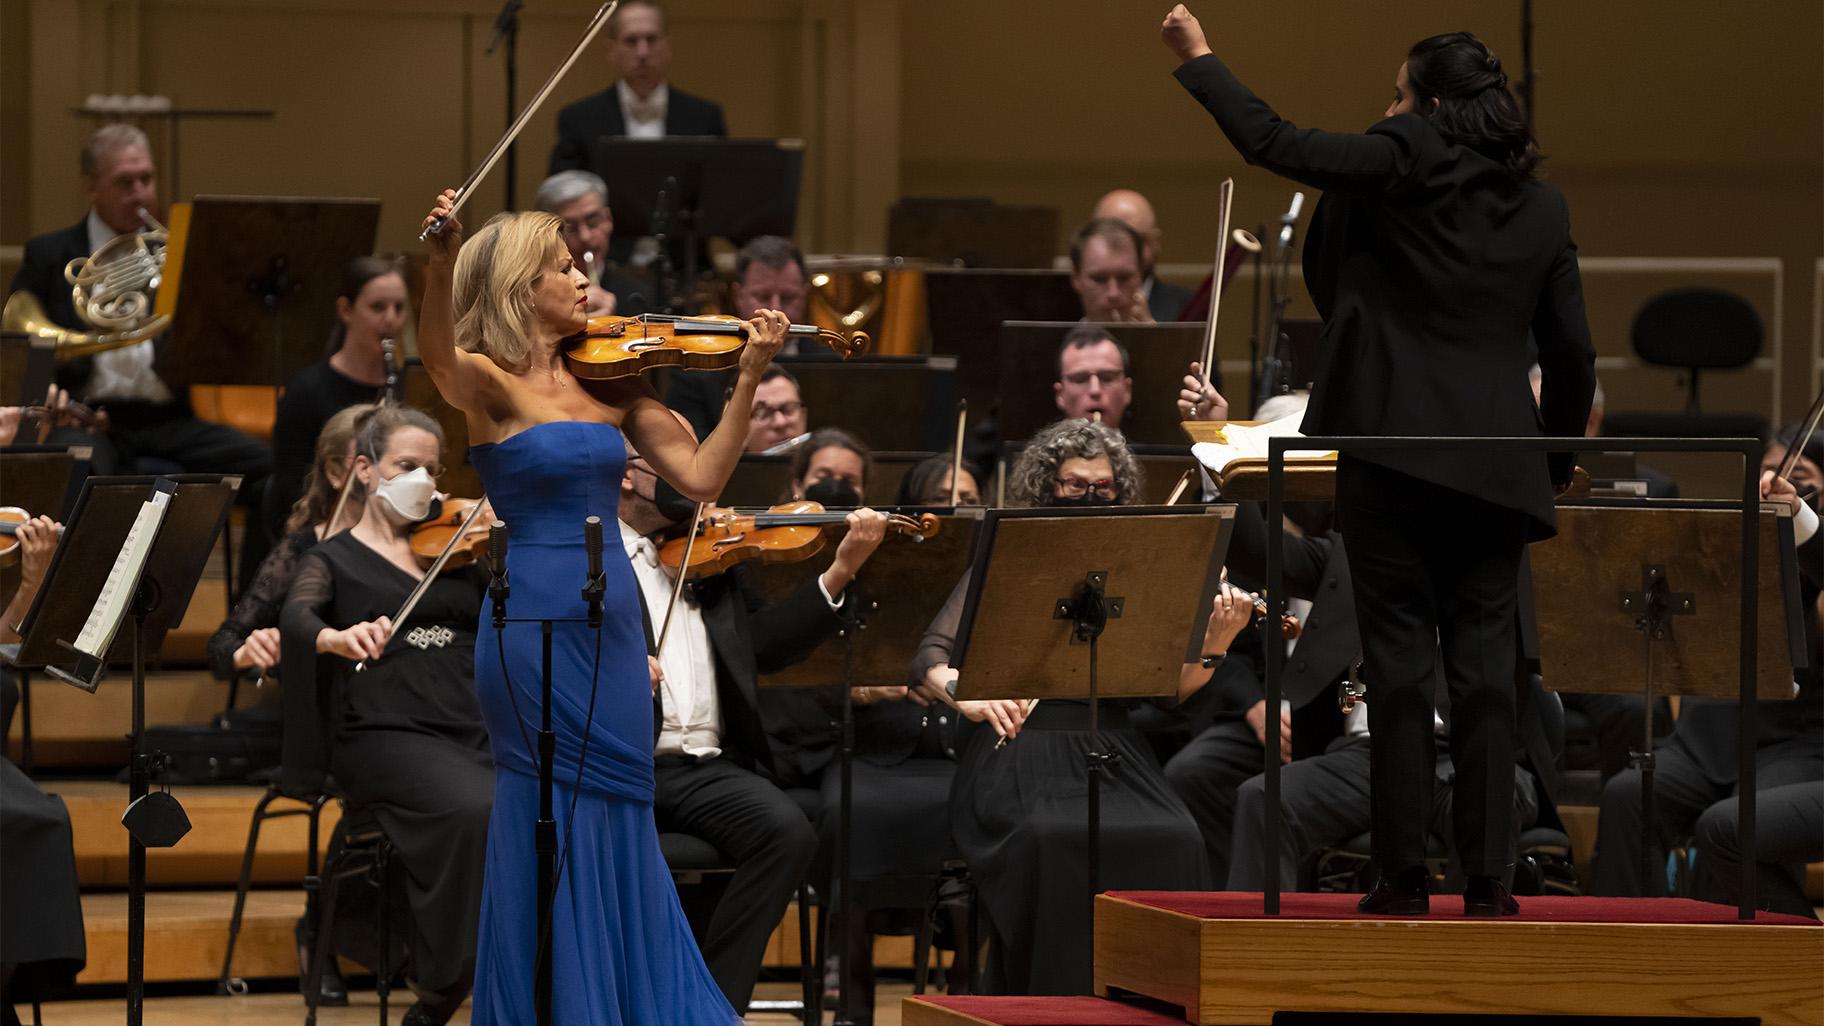 The CSO’s Sir Georg Solti Conducting Apprentice Lina González - Granados leads the Chicago Symphony Orchestra and soloist Anne - Sophie Mutter in Beethoven’s Violin Concerto in D Major.  (Credit: Todd Rosenberg)